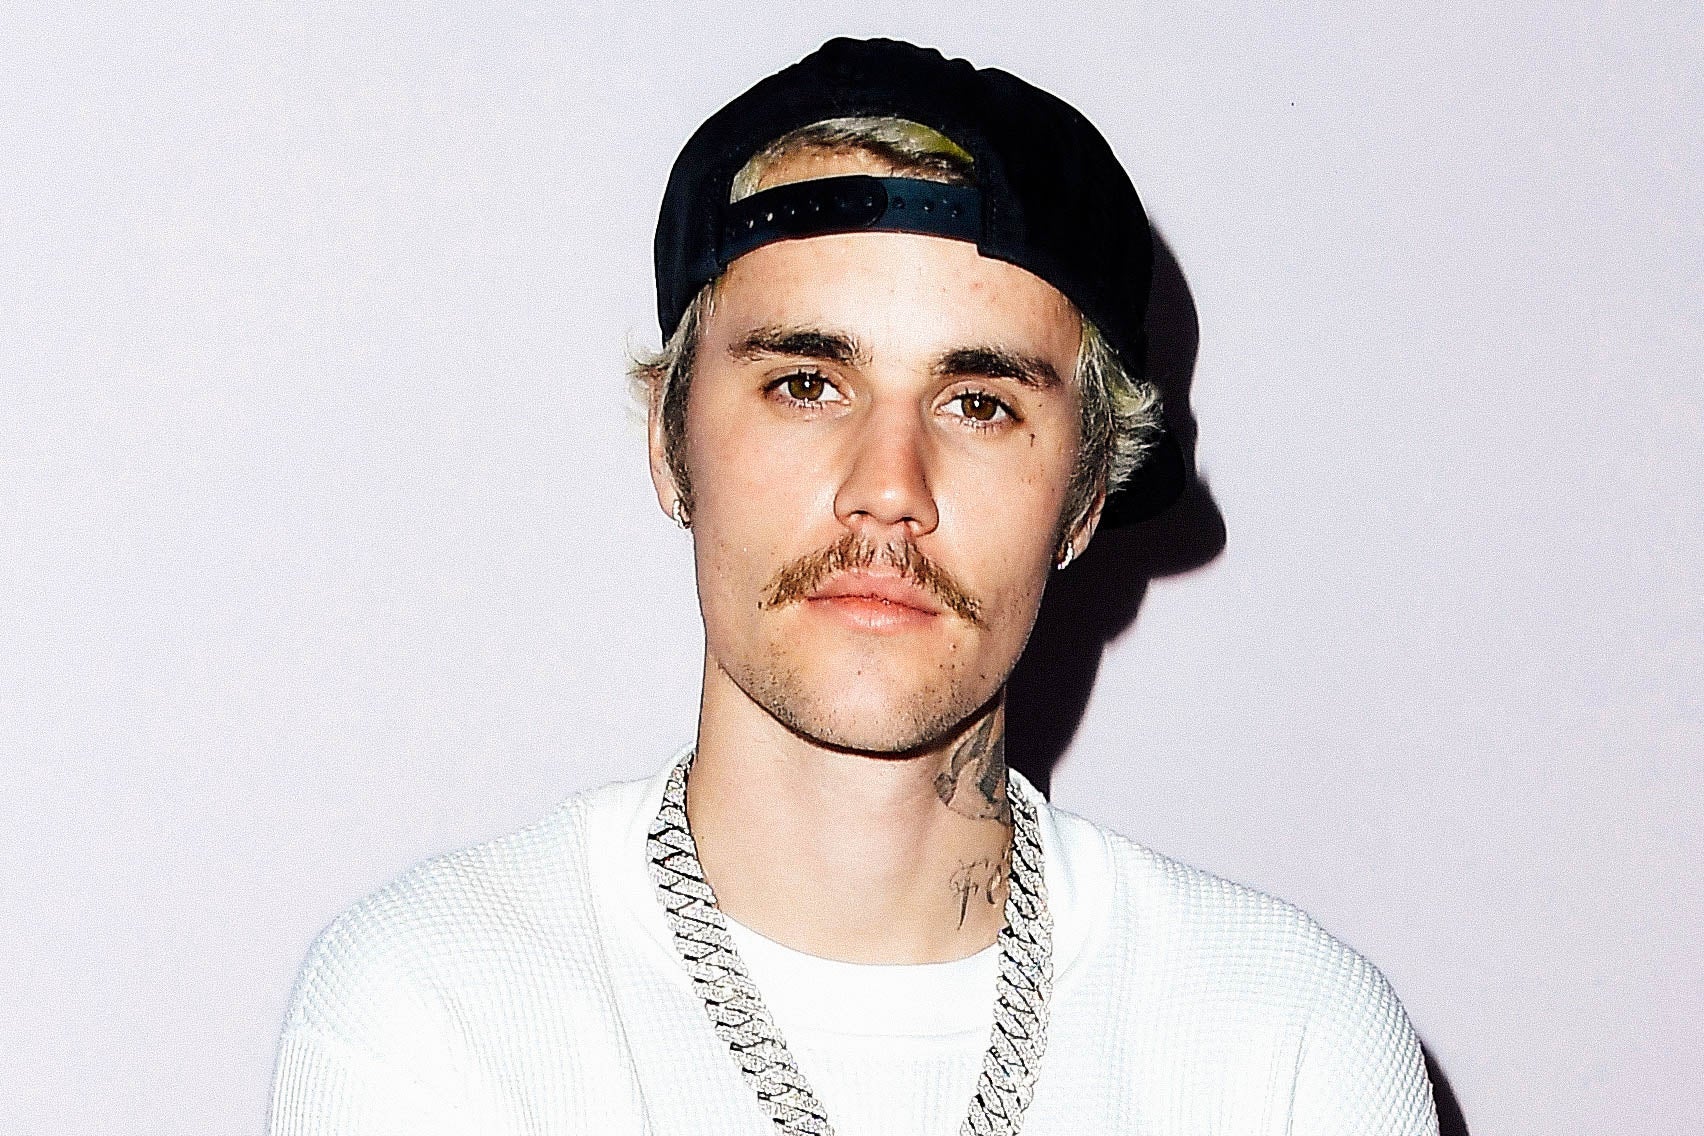 Justin Bieber in a white shirt, black hat, and silver chain, sporting a mustache.